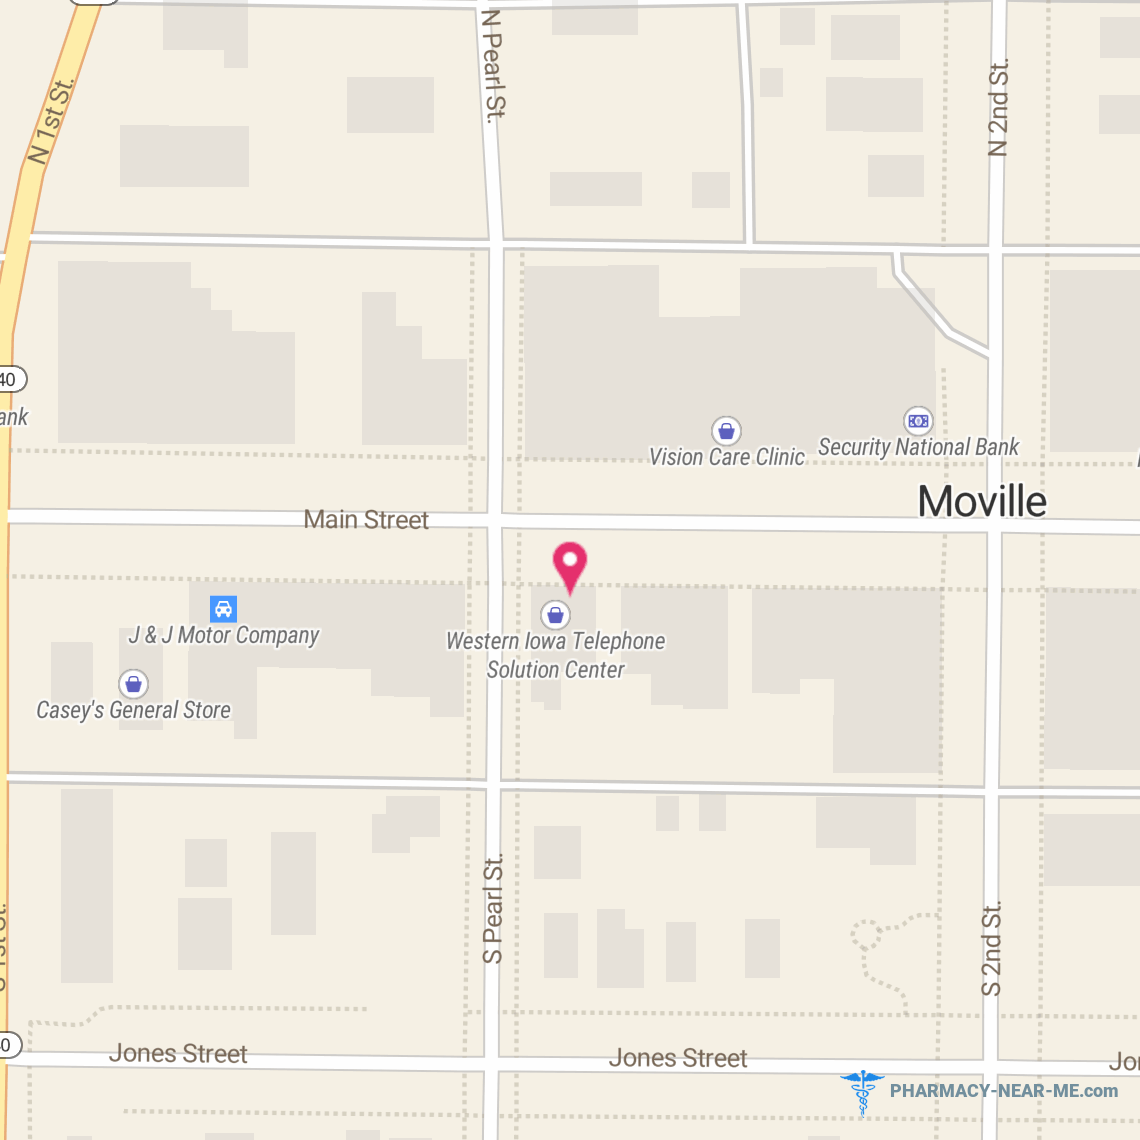 MOVILLE PHARMACY INC - Pharmacy Hours, Phone, Reviews & Information: 216 Main Street, Moville, Iowa 51039, United States